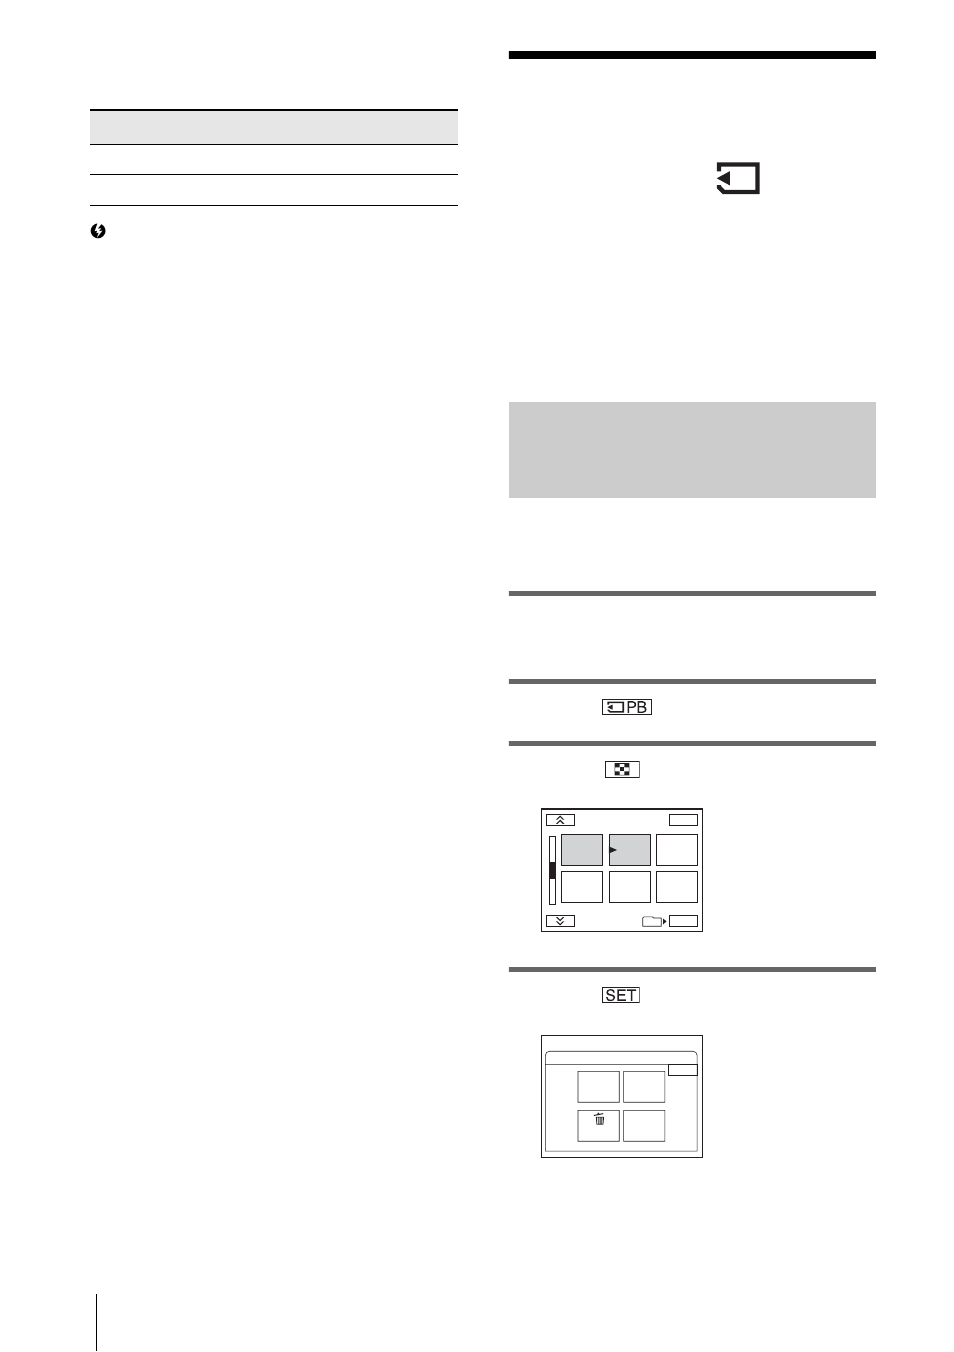 Marking recorded images with specific, Information, P. 82) | Marking recorded images with specific information, Preventing accidental erasure — image protection, Image protection/print mark | Sony DCR-IP1 User Manual | Page 82 / 116